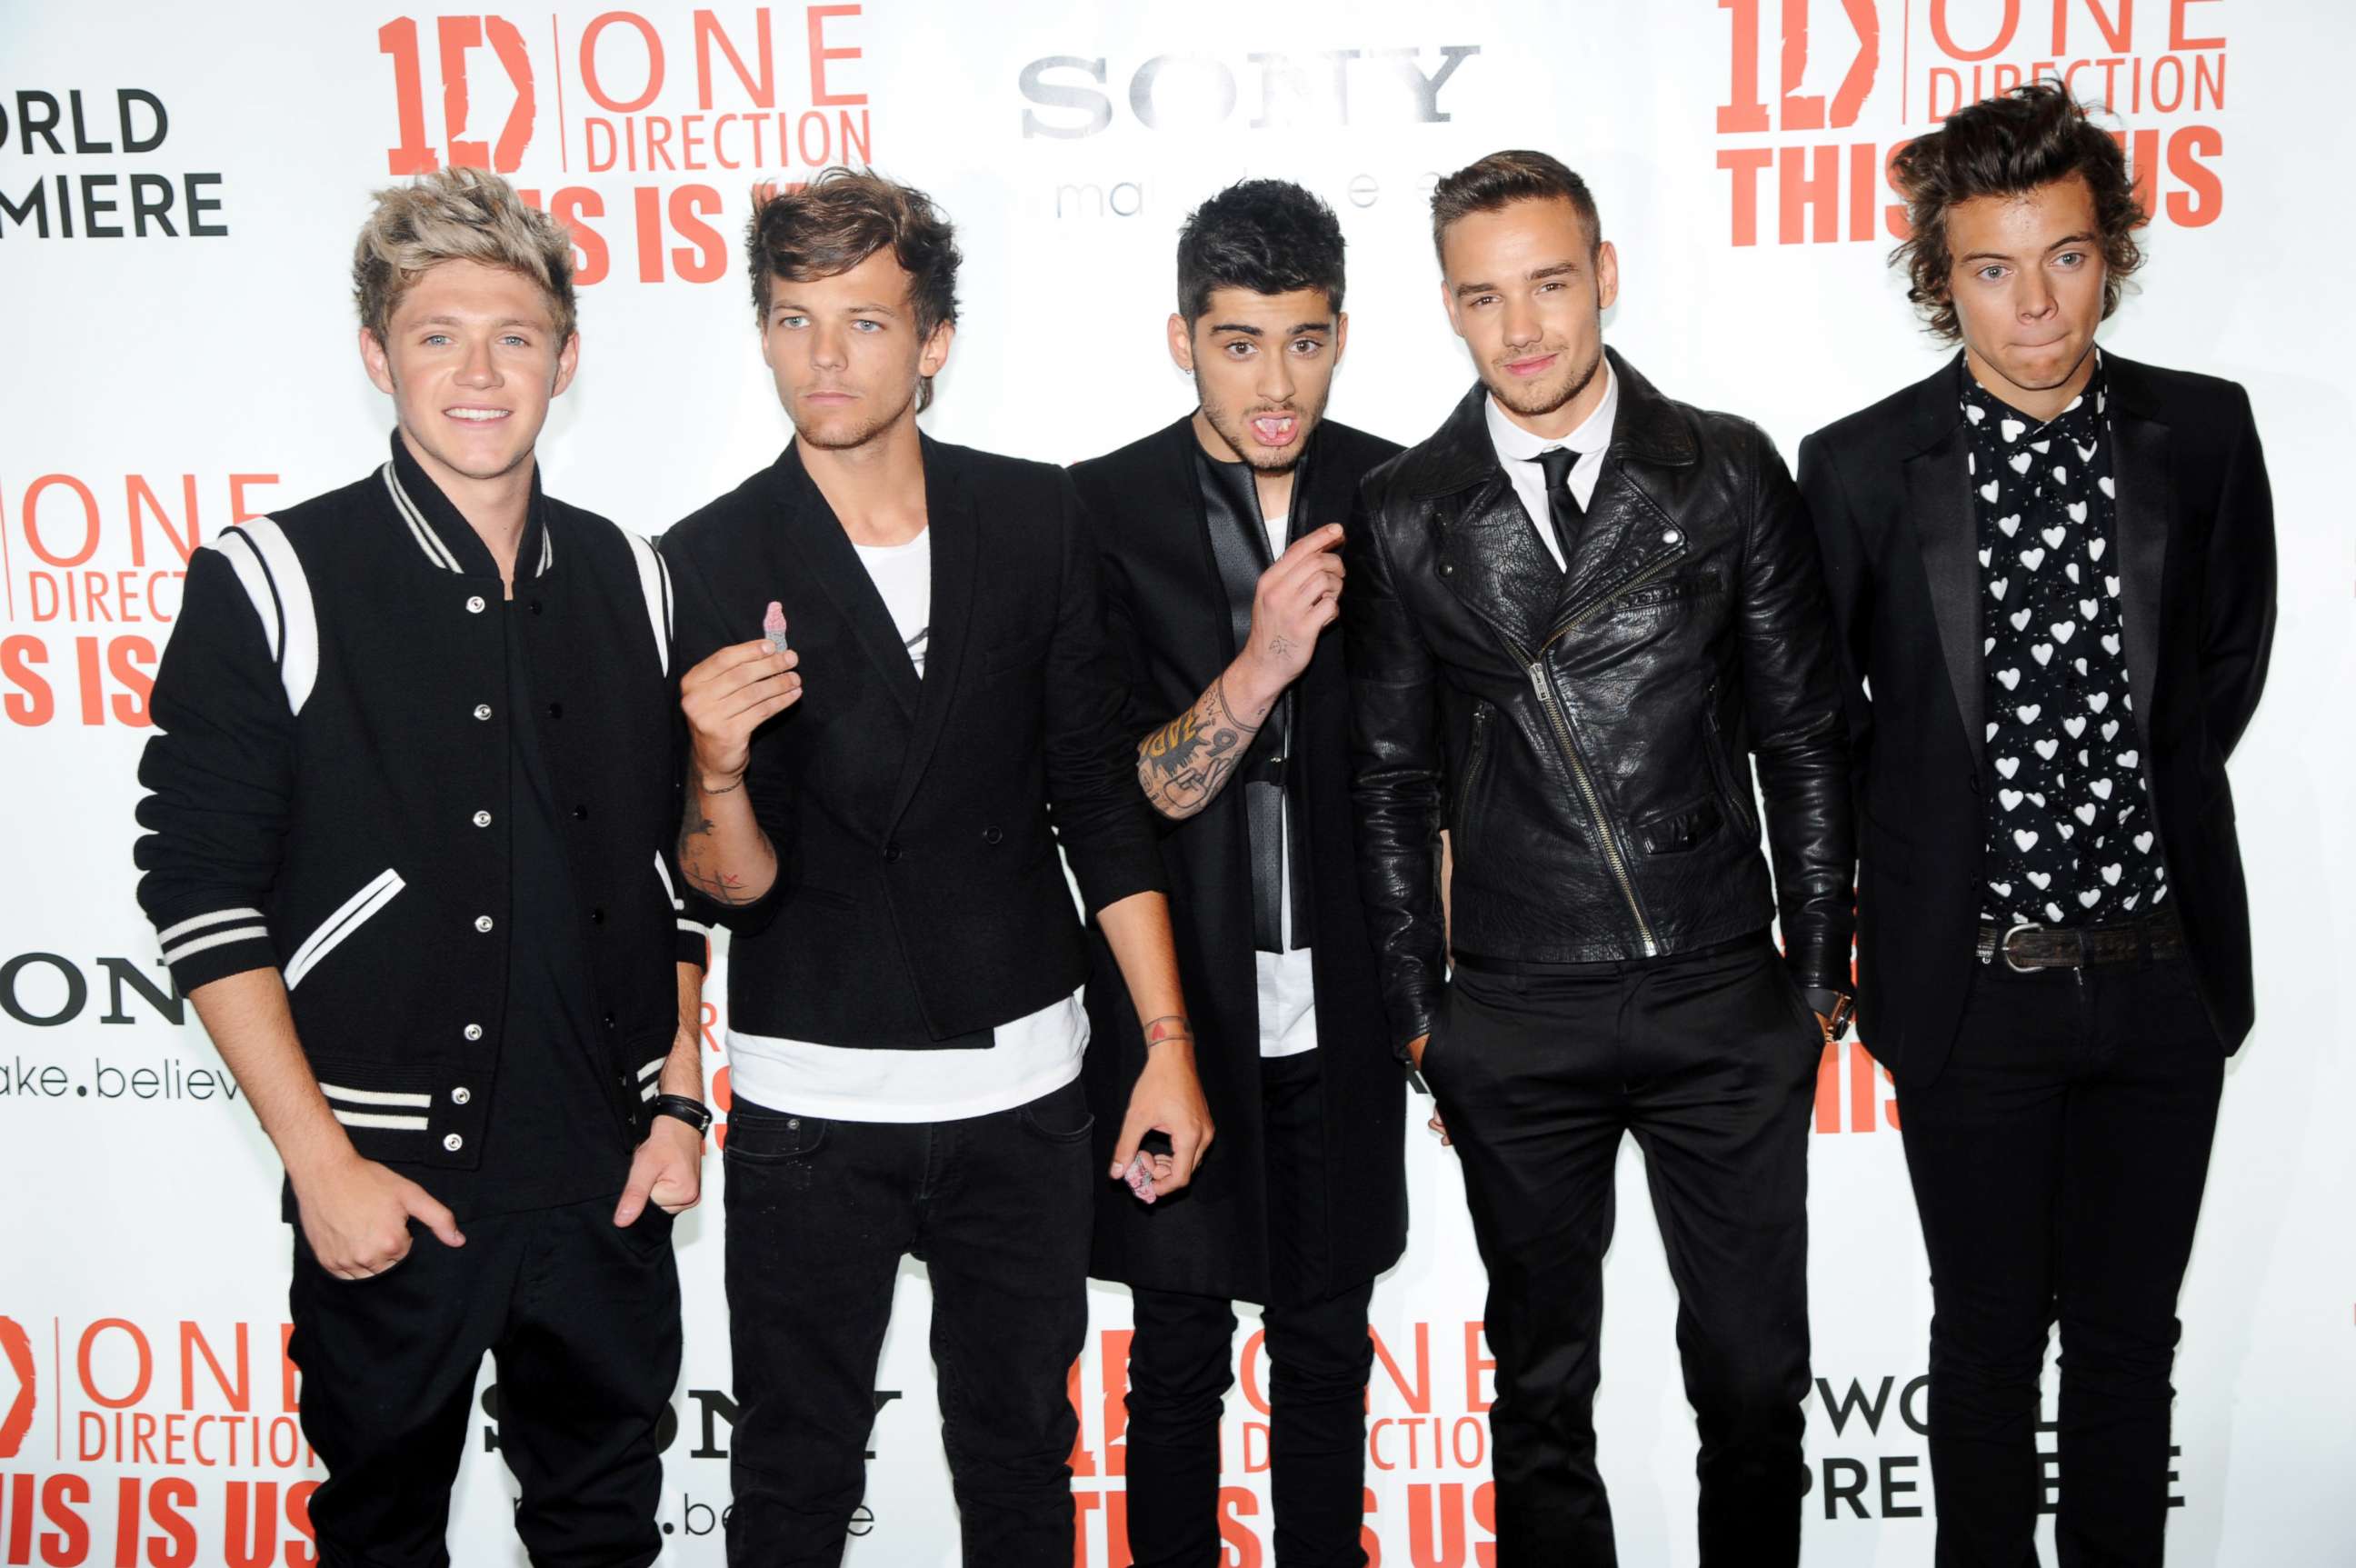 PHOTO: (L-R) Niall Horan, Louis Tomlinson, Zayn Malik, Liam Payne and Harry Styles of One Direction attend the world premiere of 'One Direction - This Is Us' at The Empire Leicester Square, Aug.t 20, 2013 in London.